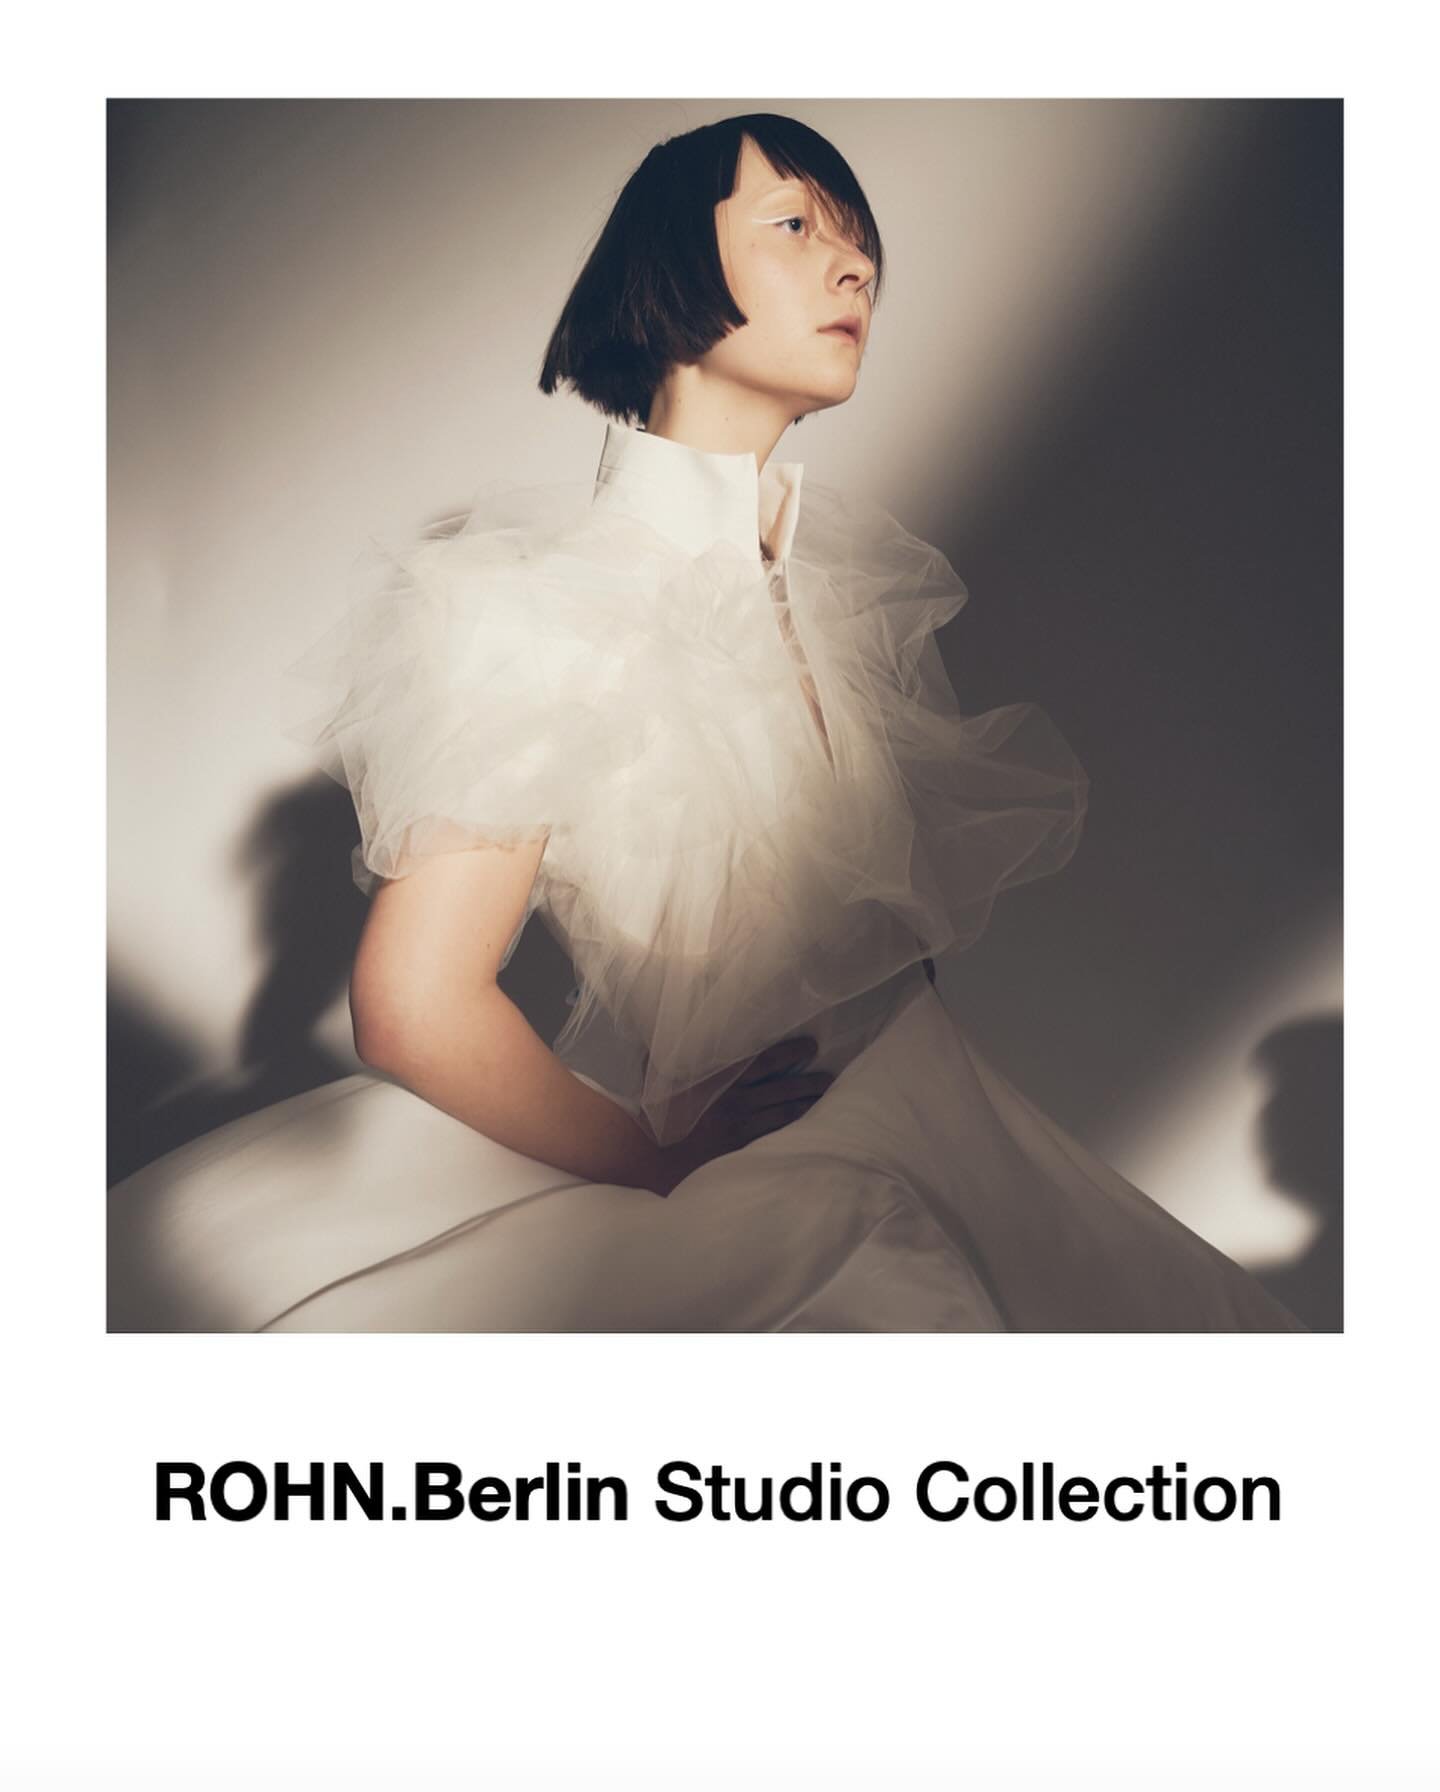 #rohnberlin #rohnberlinstudio #rohnberlincollection2024 #rohnberlinstudiocollection 

Our Studio Collection is an interplay of light and shade achieved through combinations of color and cutting techniques that touch on the shape of classic silhouette